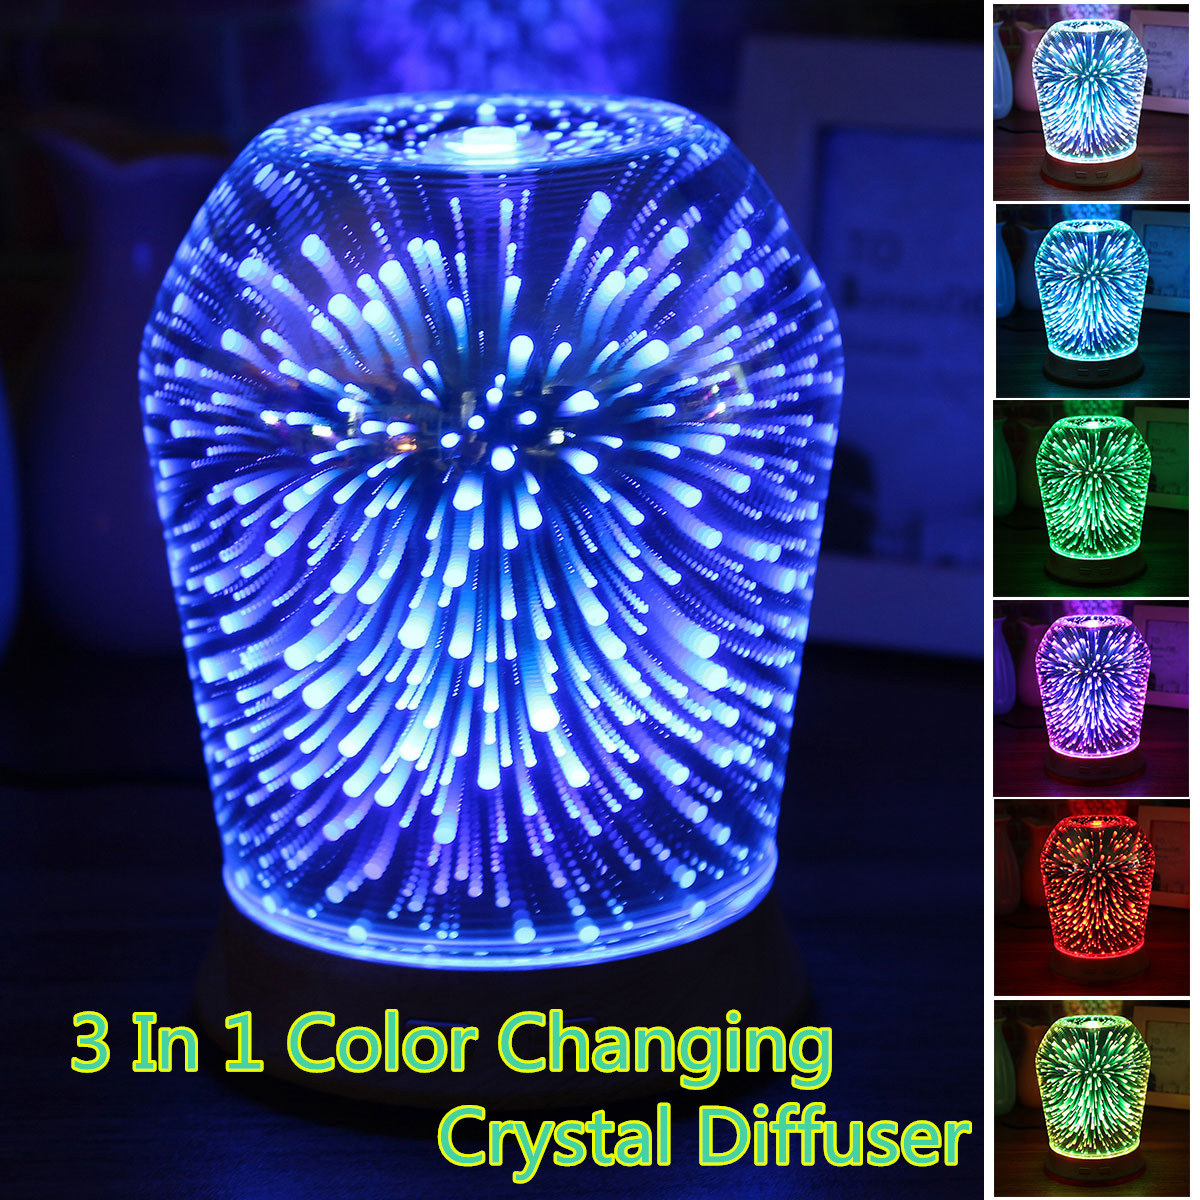 3D-LED-Ultrasonic-Diffuser-Humidifier-Aromatherapy-Essential-Oil-Diffuser-Mist-Humidifier-1421490-5